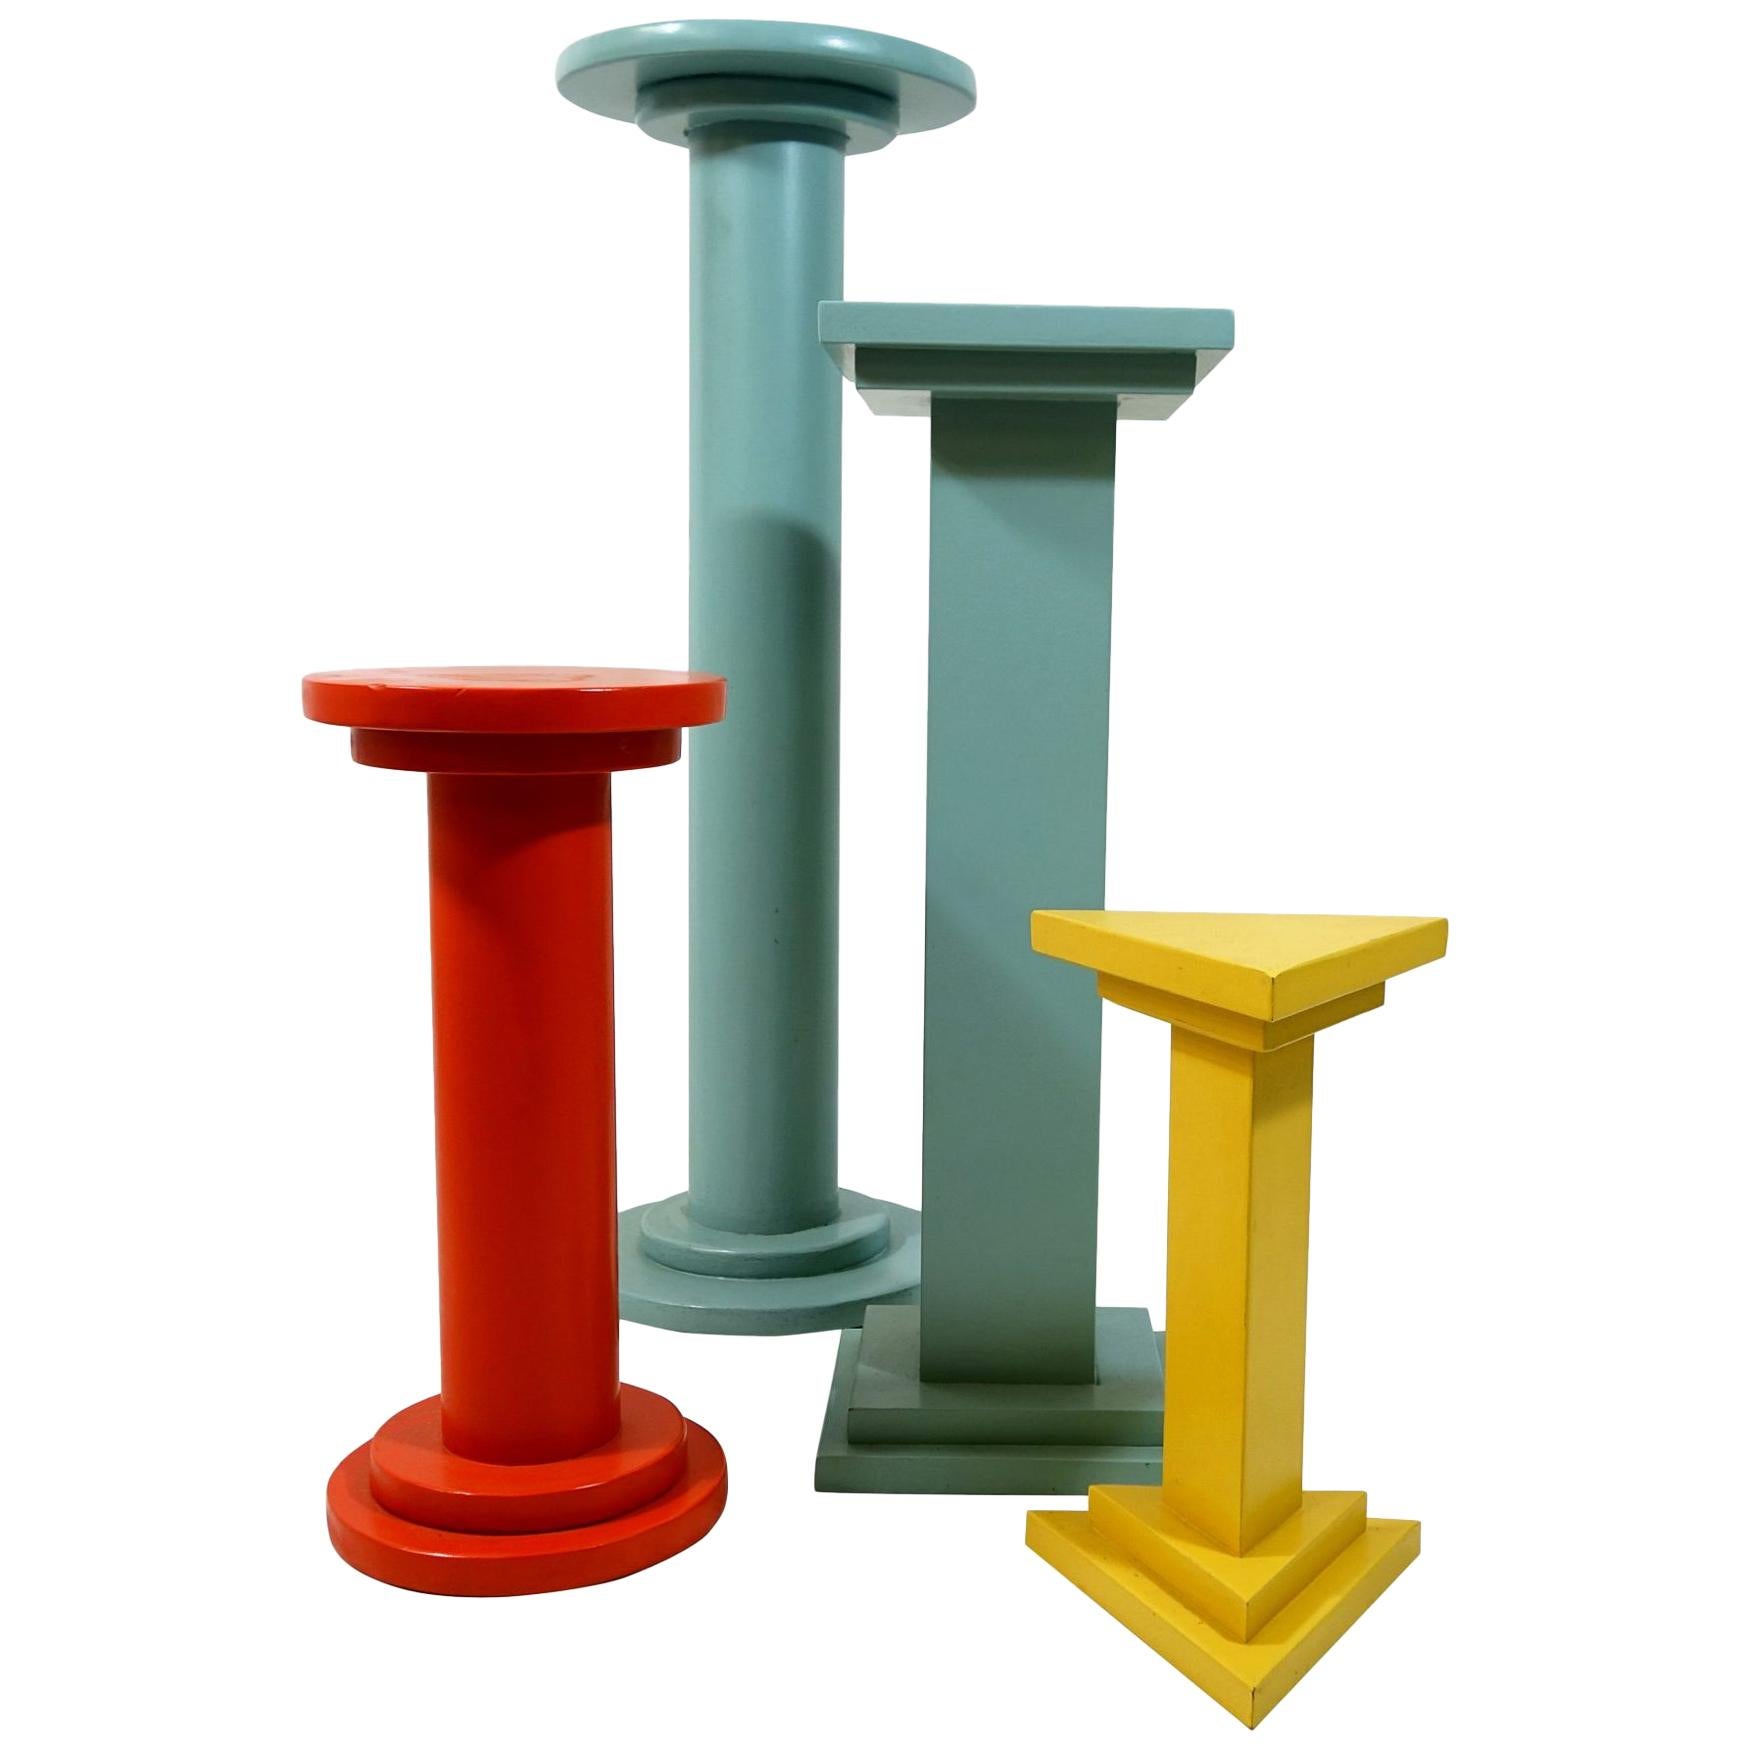 Set of 4 Art Deco Style Wooden Pedestals or Plant Stands in 1930s Colors